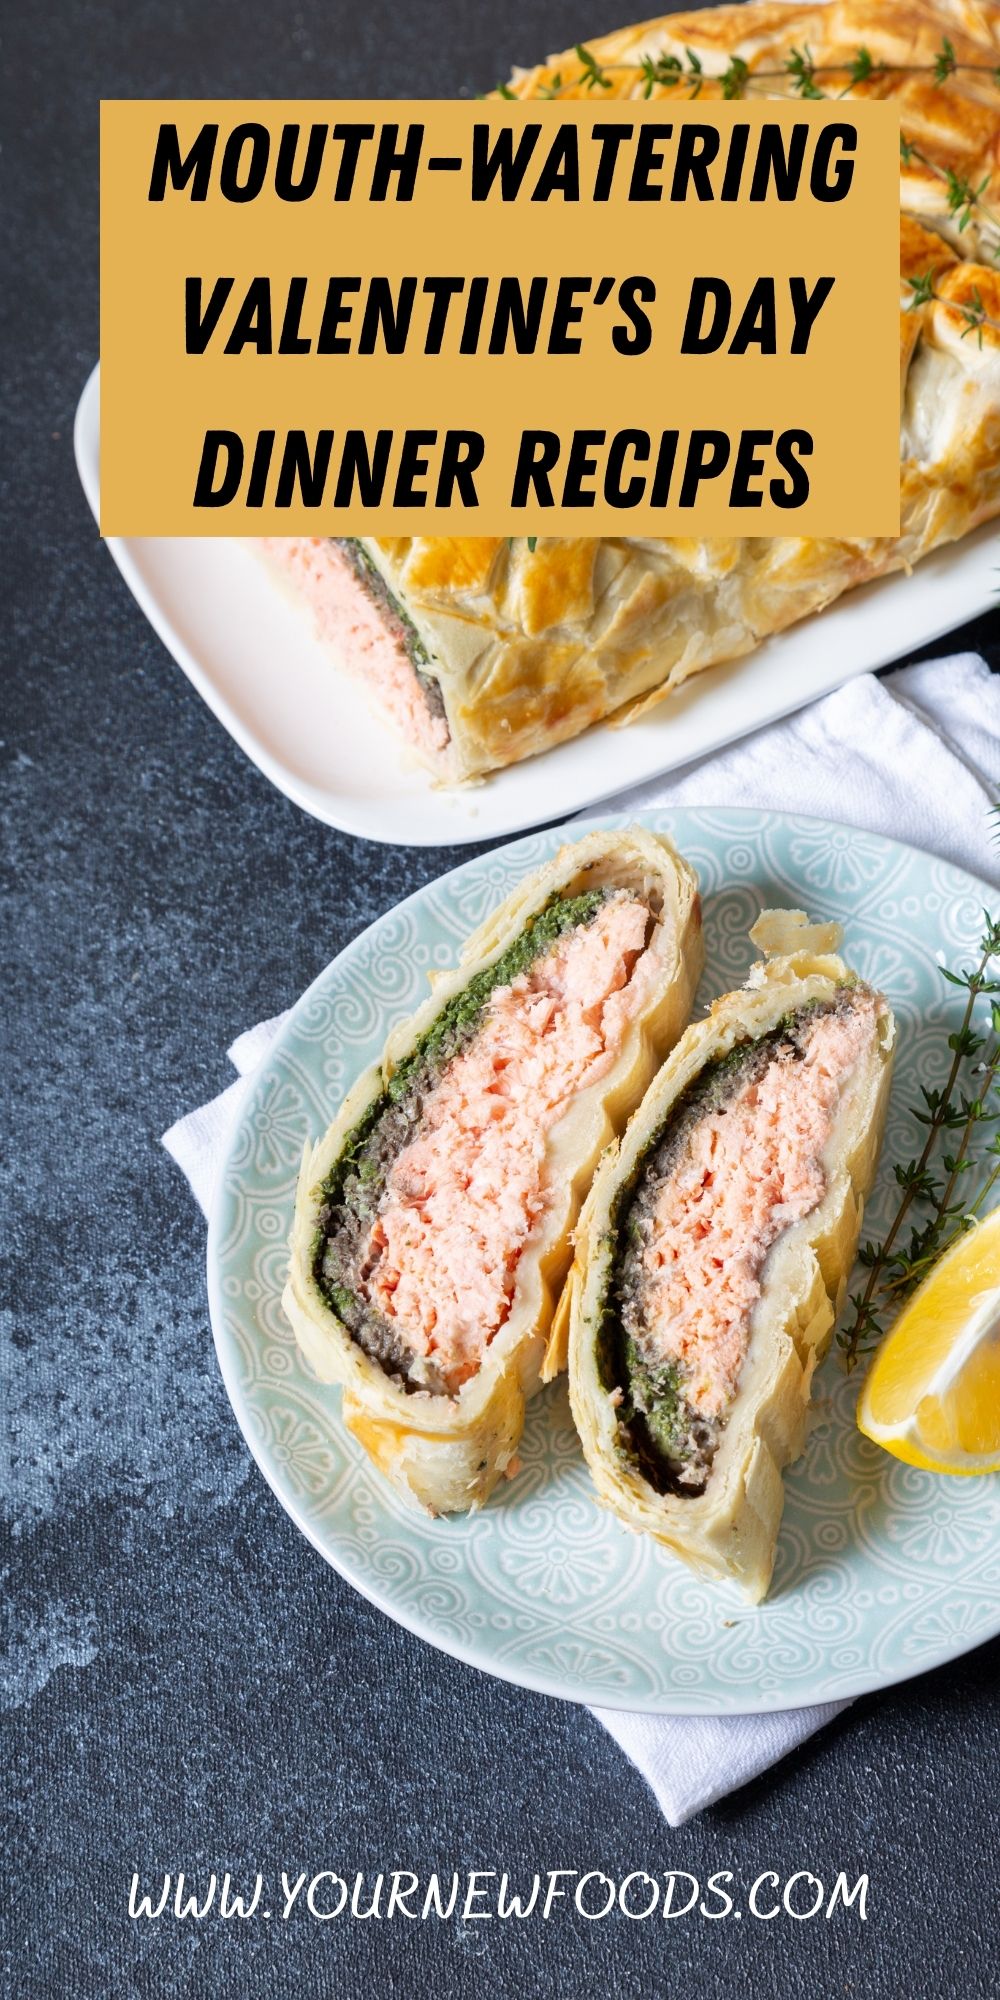 salmon wellington with two cut pieces showing the salmon inside